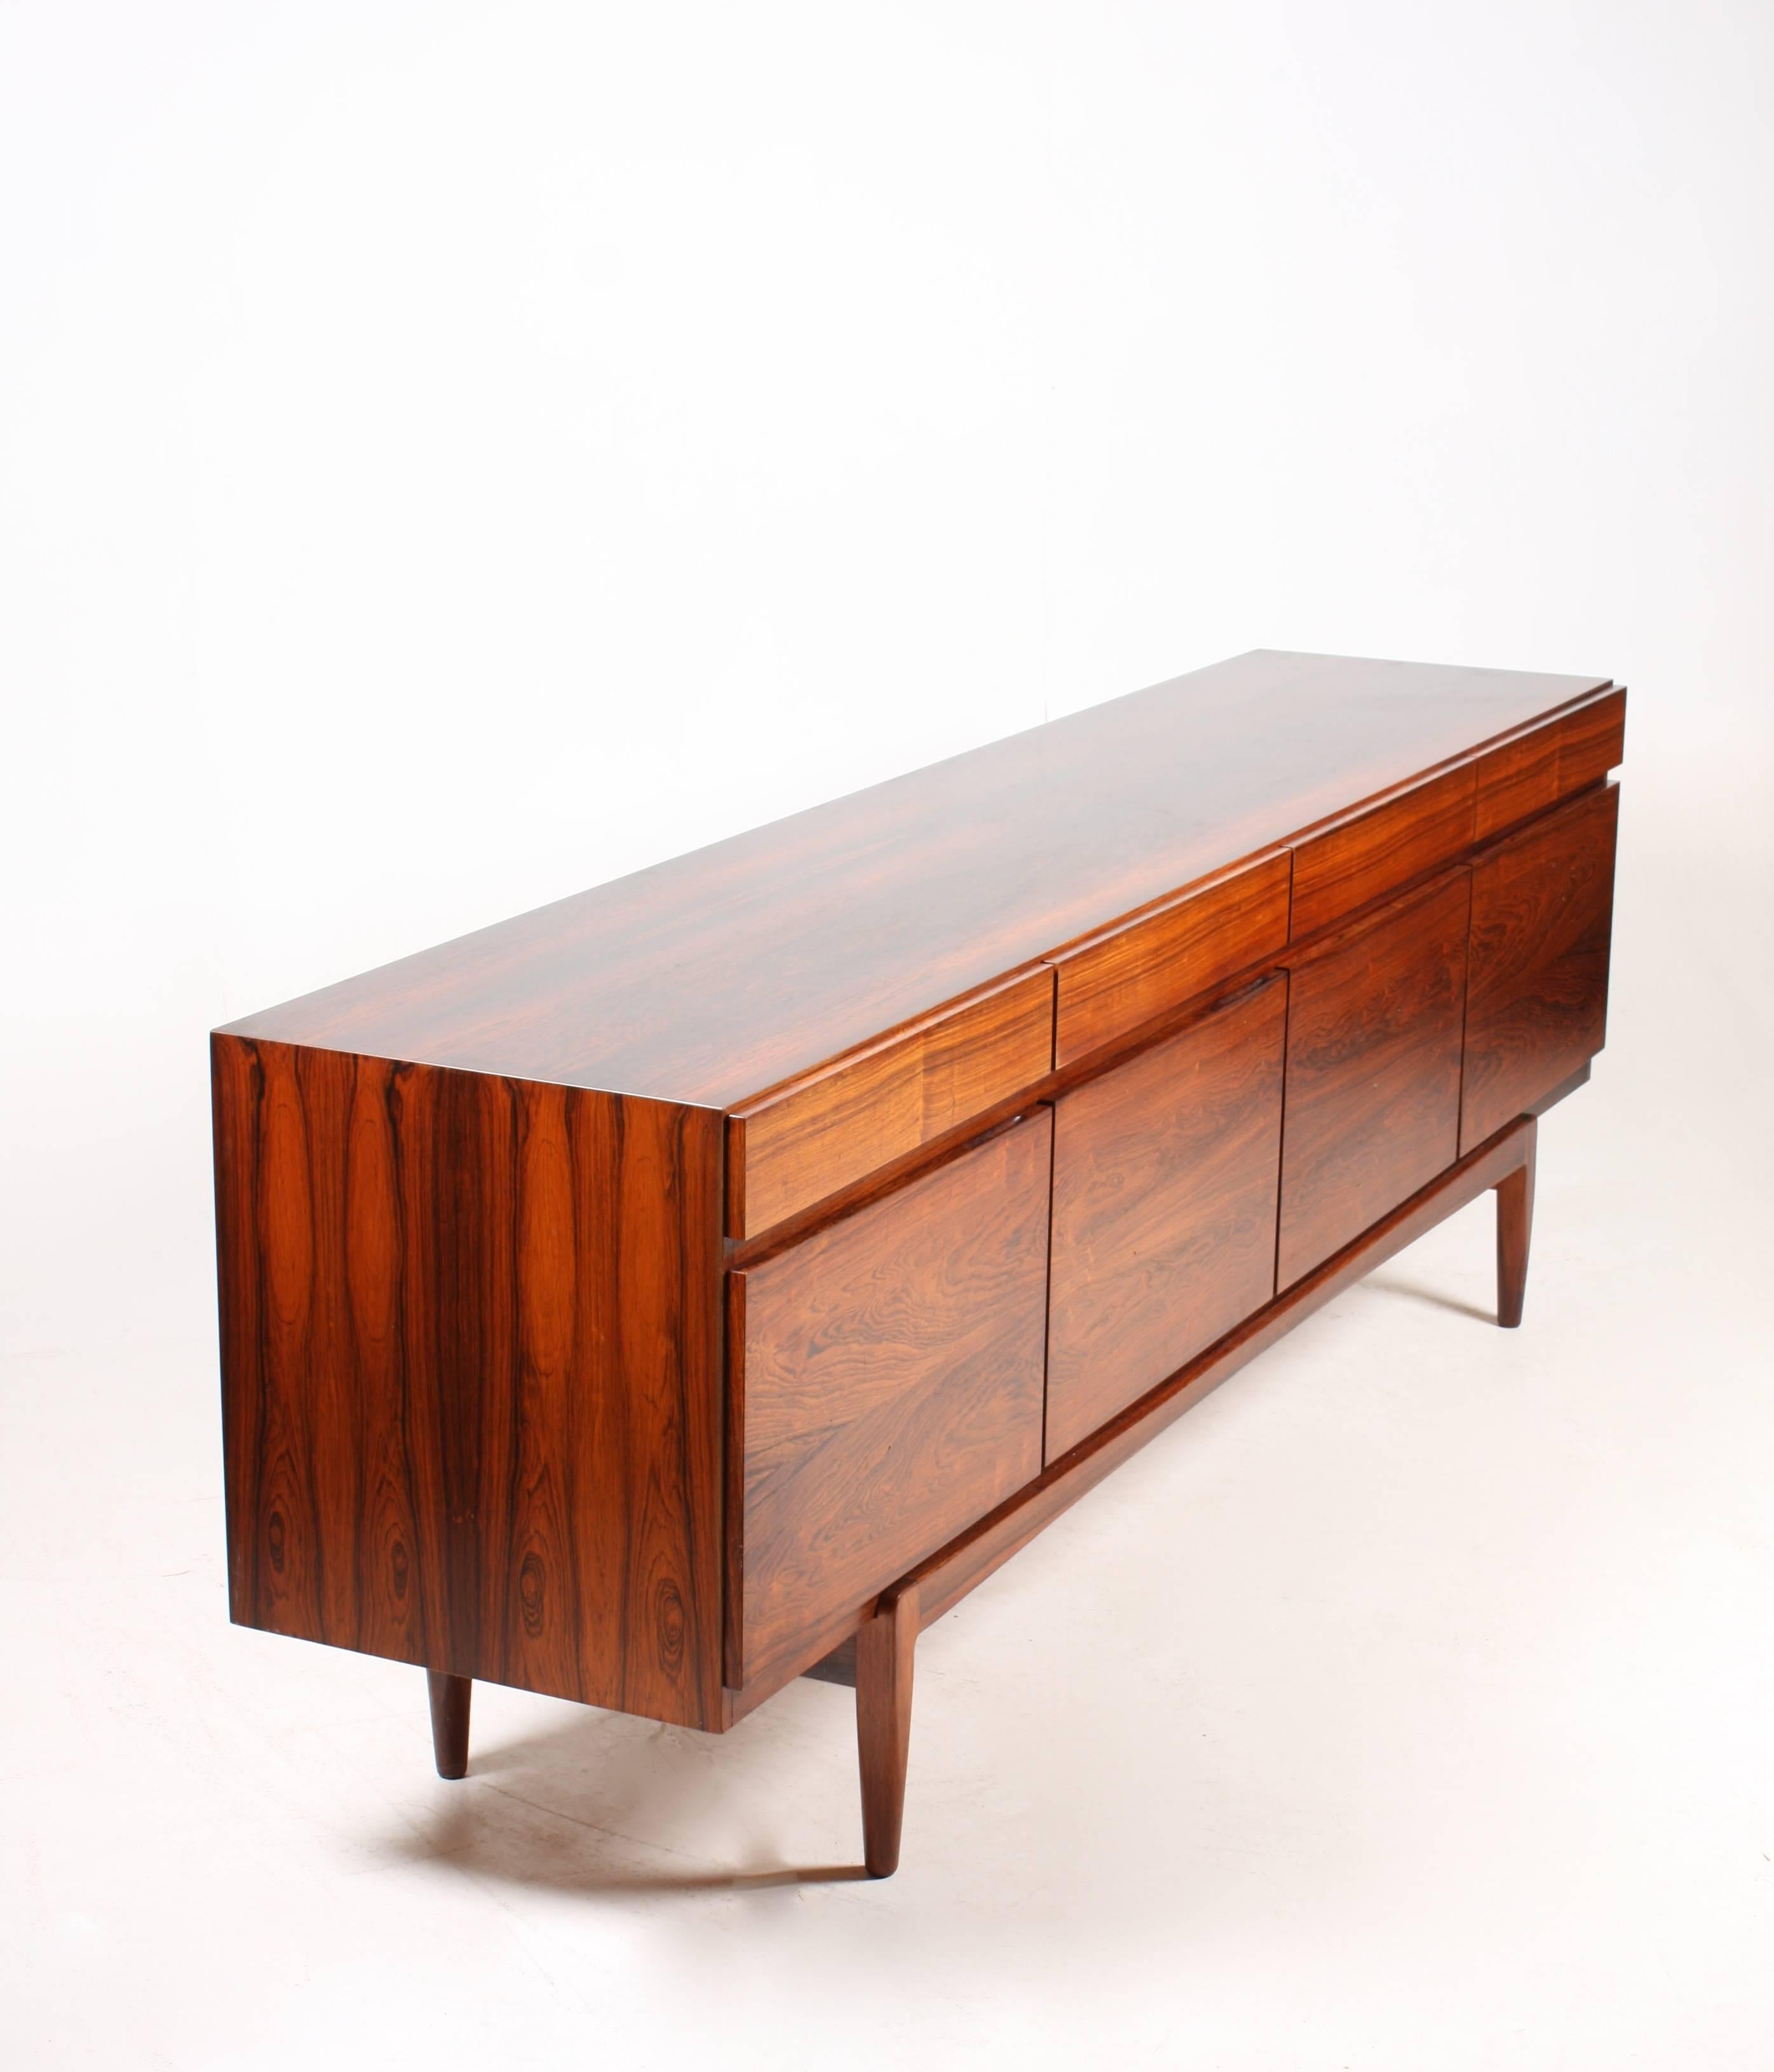 Great looking sideboard in rosewood designed by MAA. Ib Kofod-Larsen. Made by Faarup Møbelfabrik. Model no.66. Original condition.